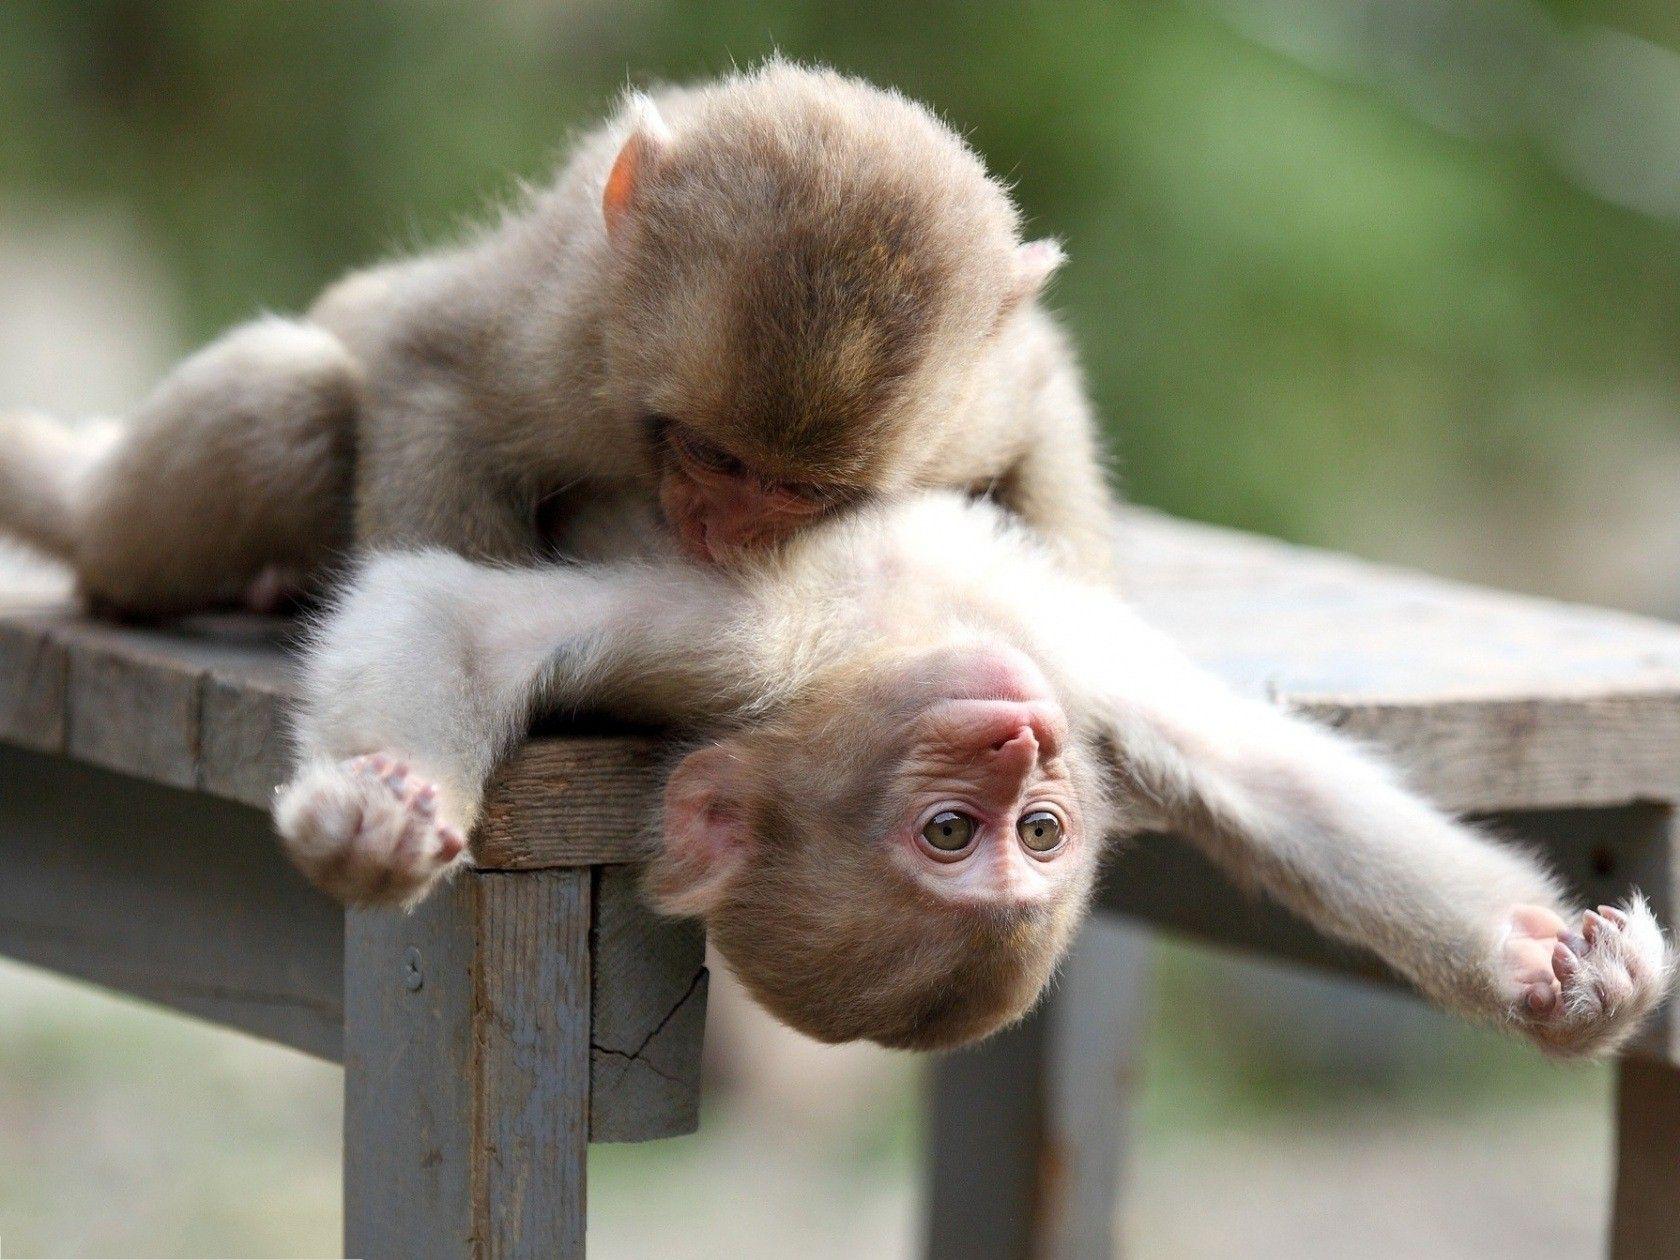 Amazing HD Wallpaper of Monkey Baby Playing Together. HD Famous